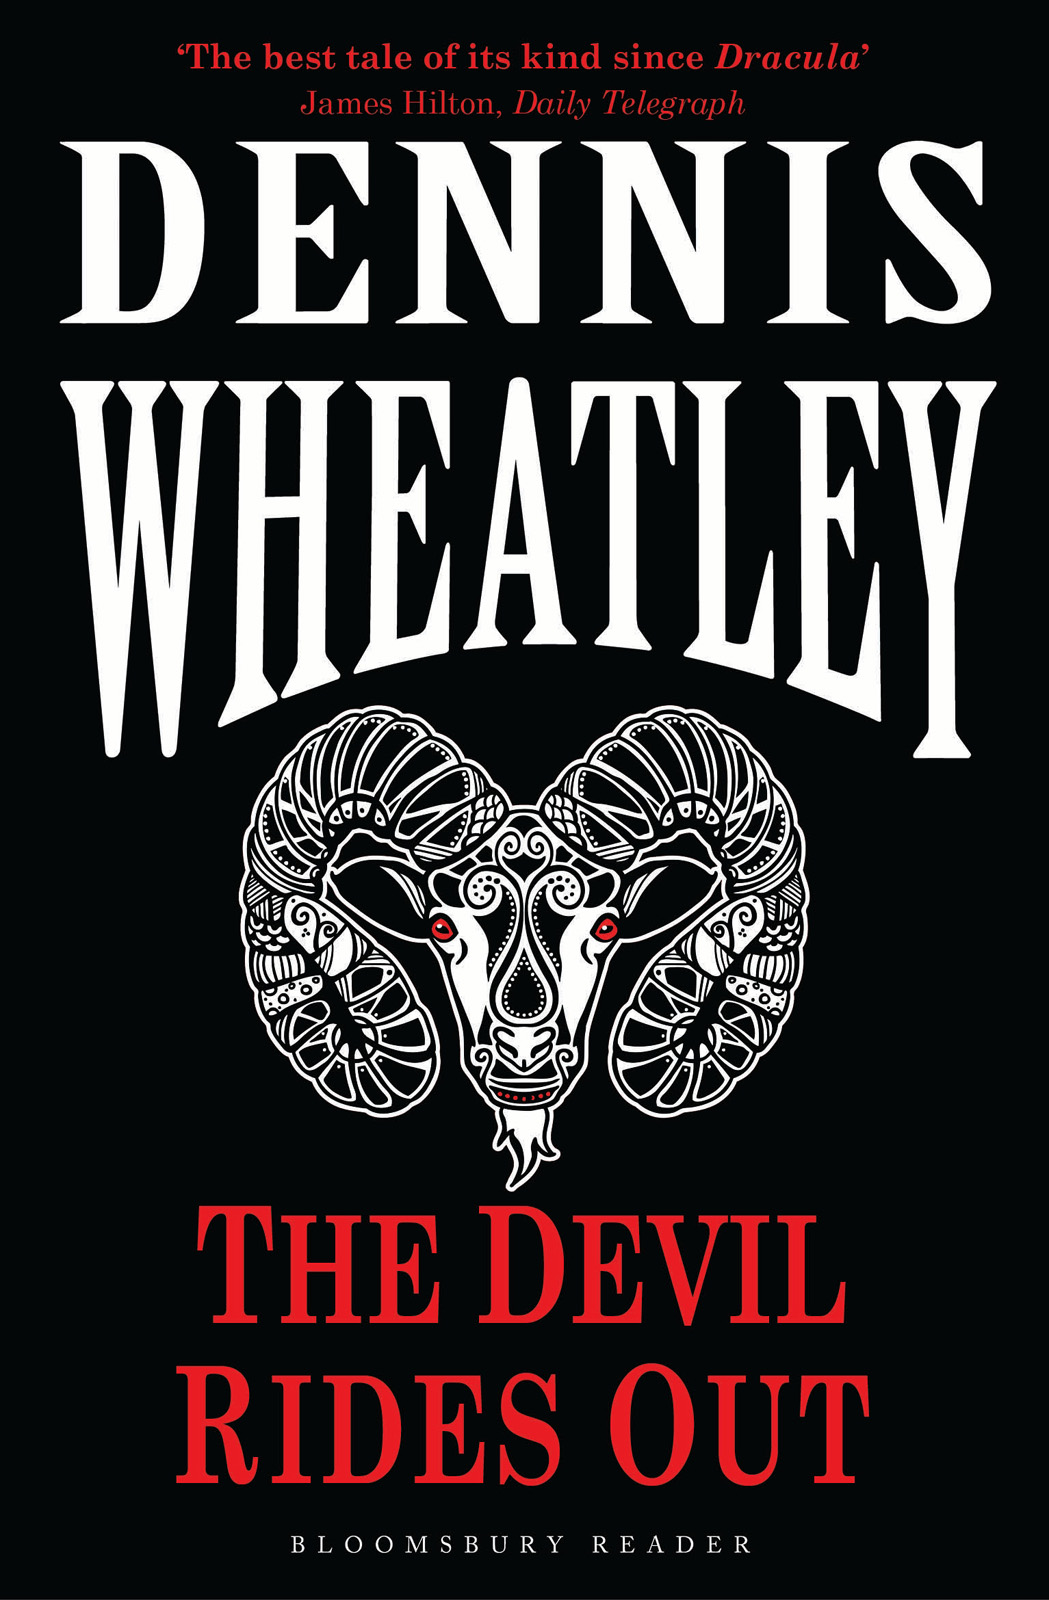 The Devil Rides Out (2013) by Dennis Wheatley